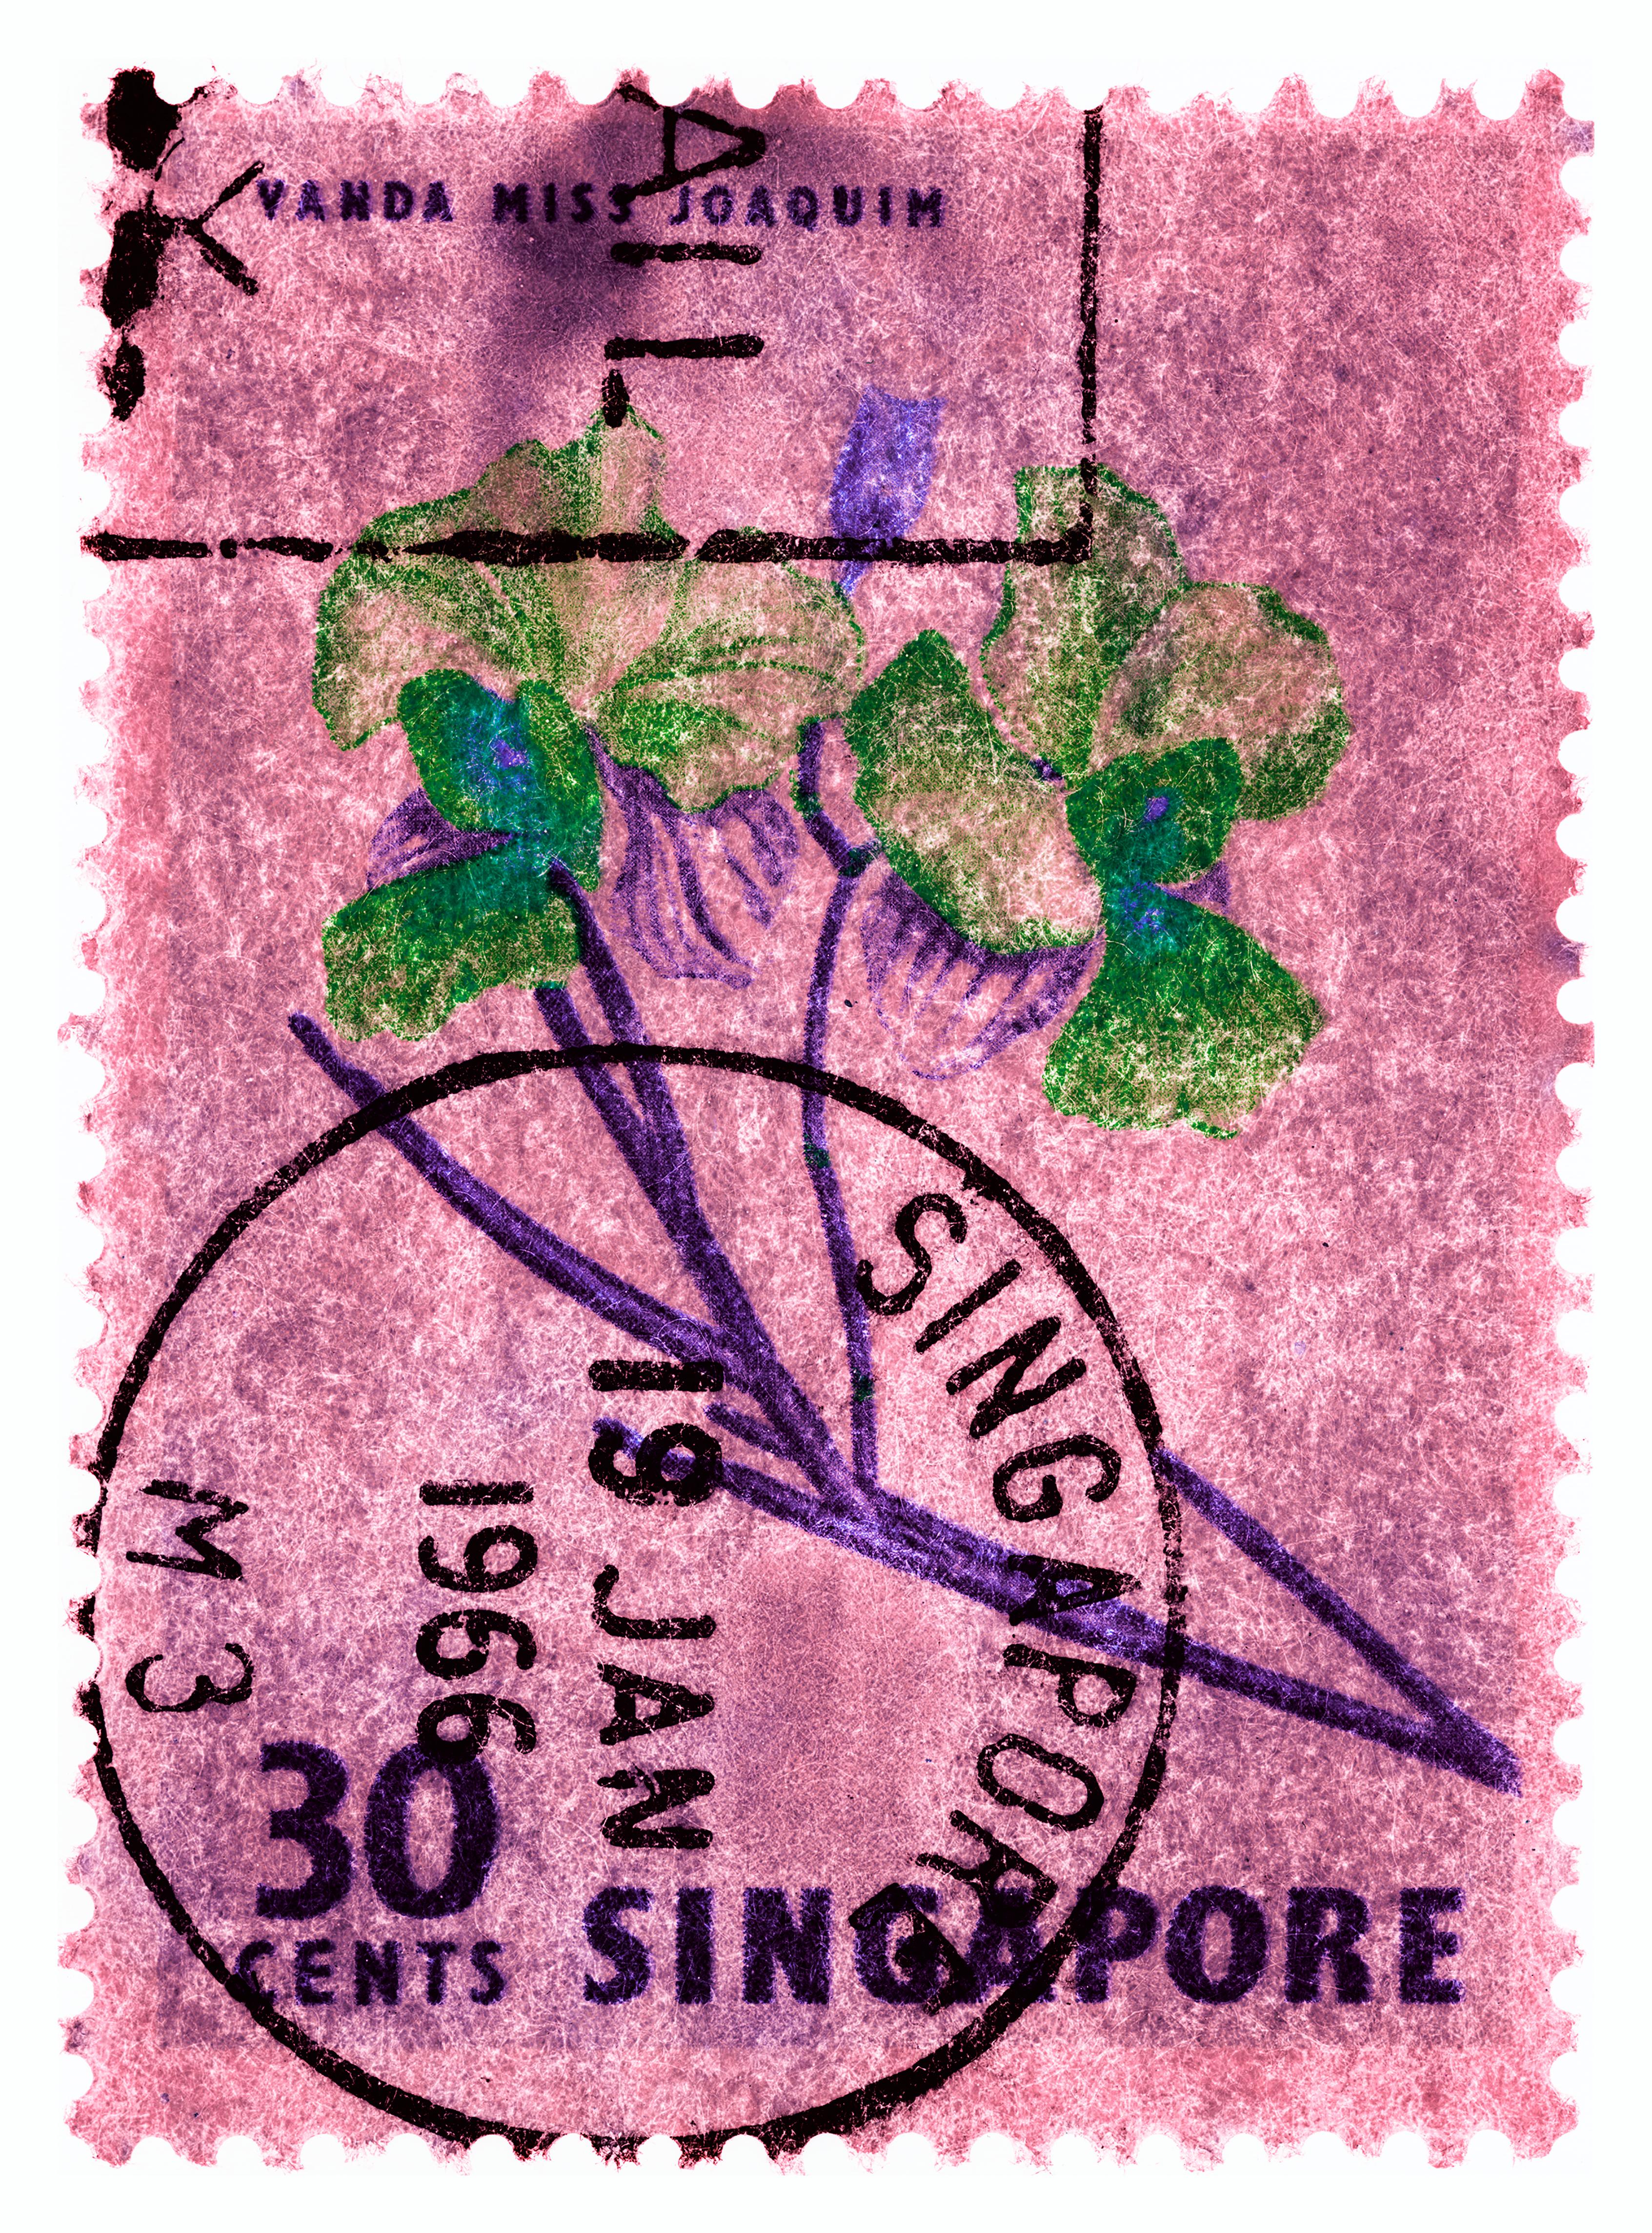 Heidler & Heeps Color Photograph - Singapore Stamp Collection, 30c Singapore Orchid Pink - Floral color photo